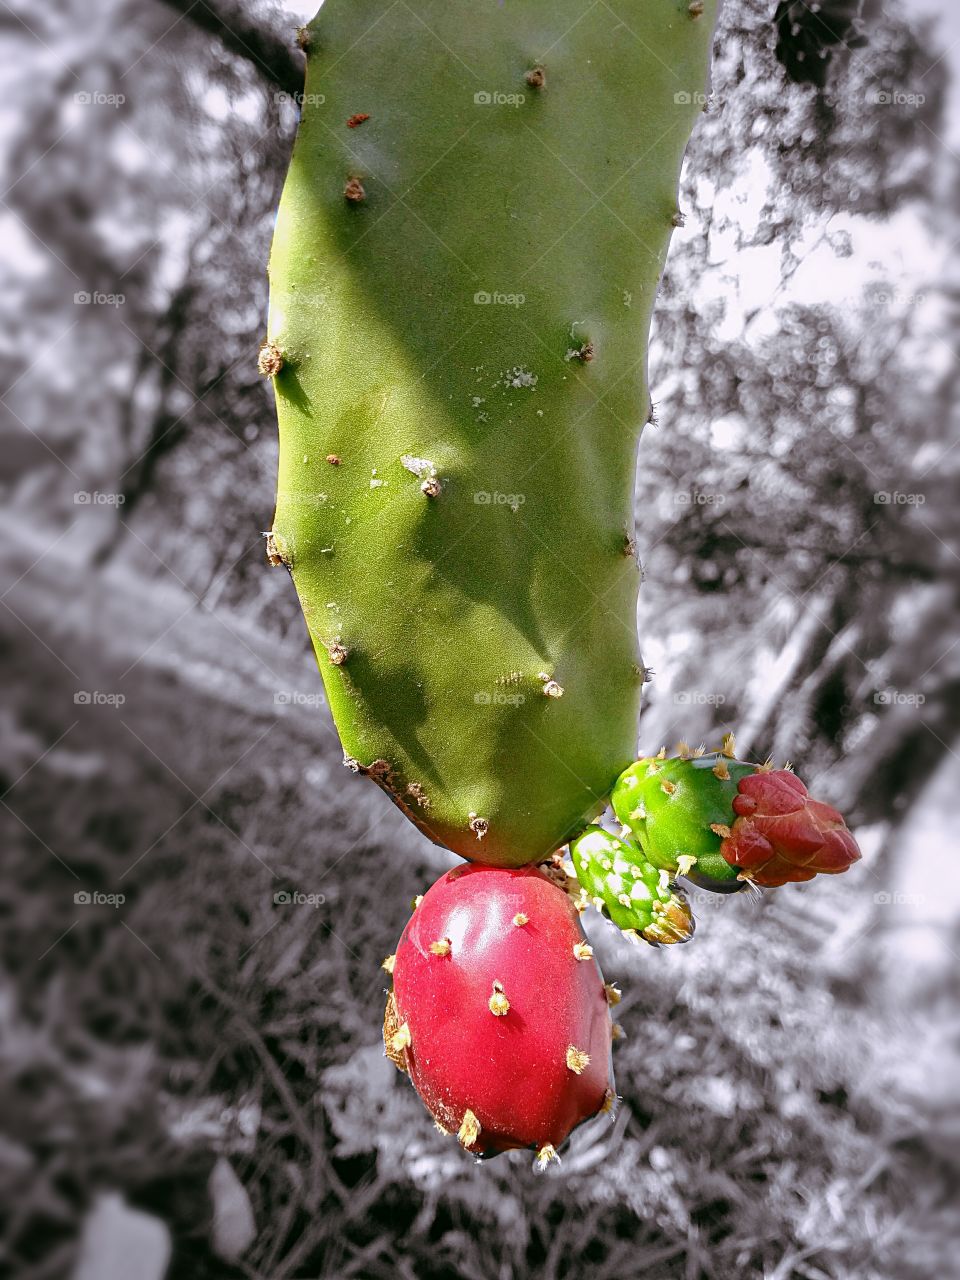 colorful cactus fruit and flower with a black and white background